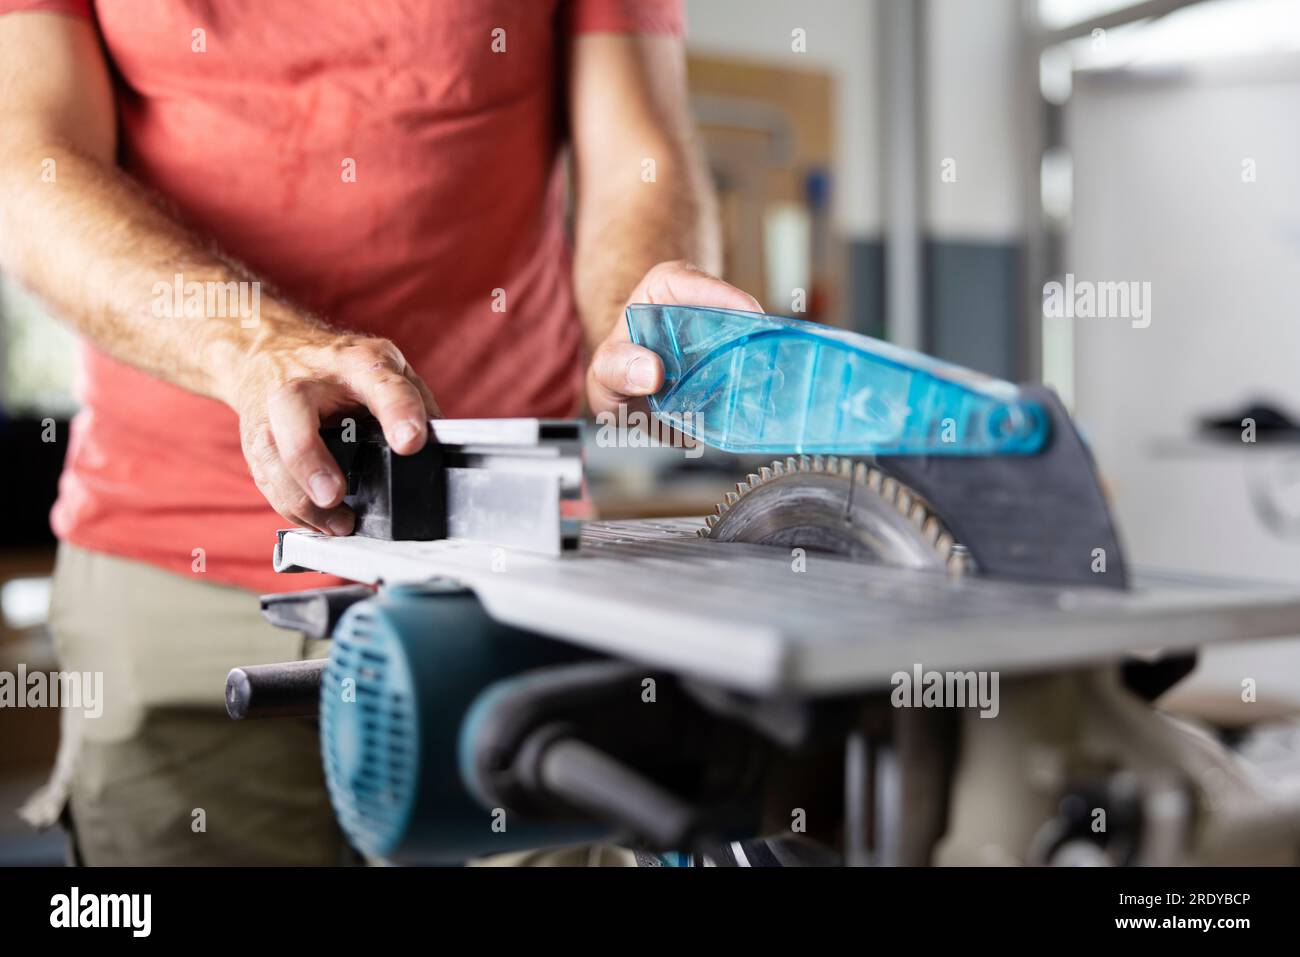 Hands of carpenter working on circular saw at workshop Stock Photo